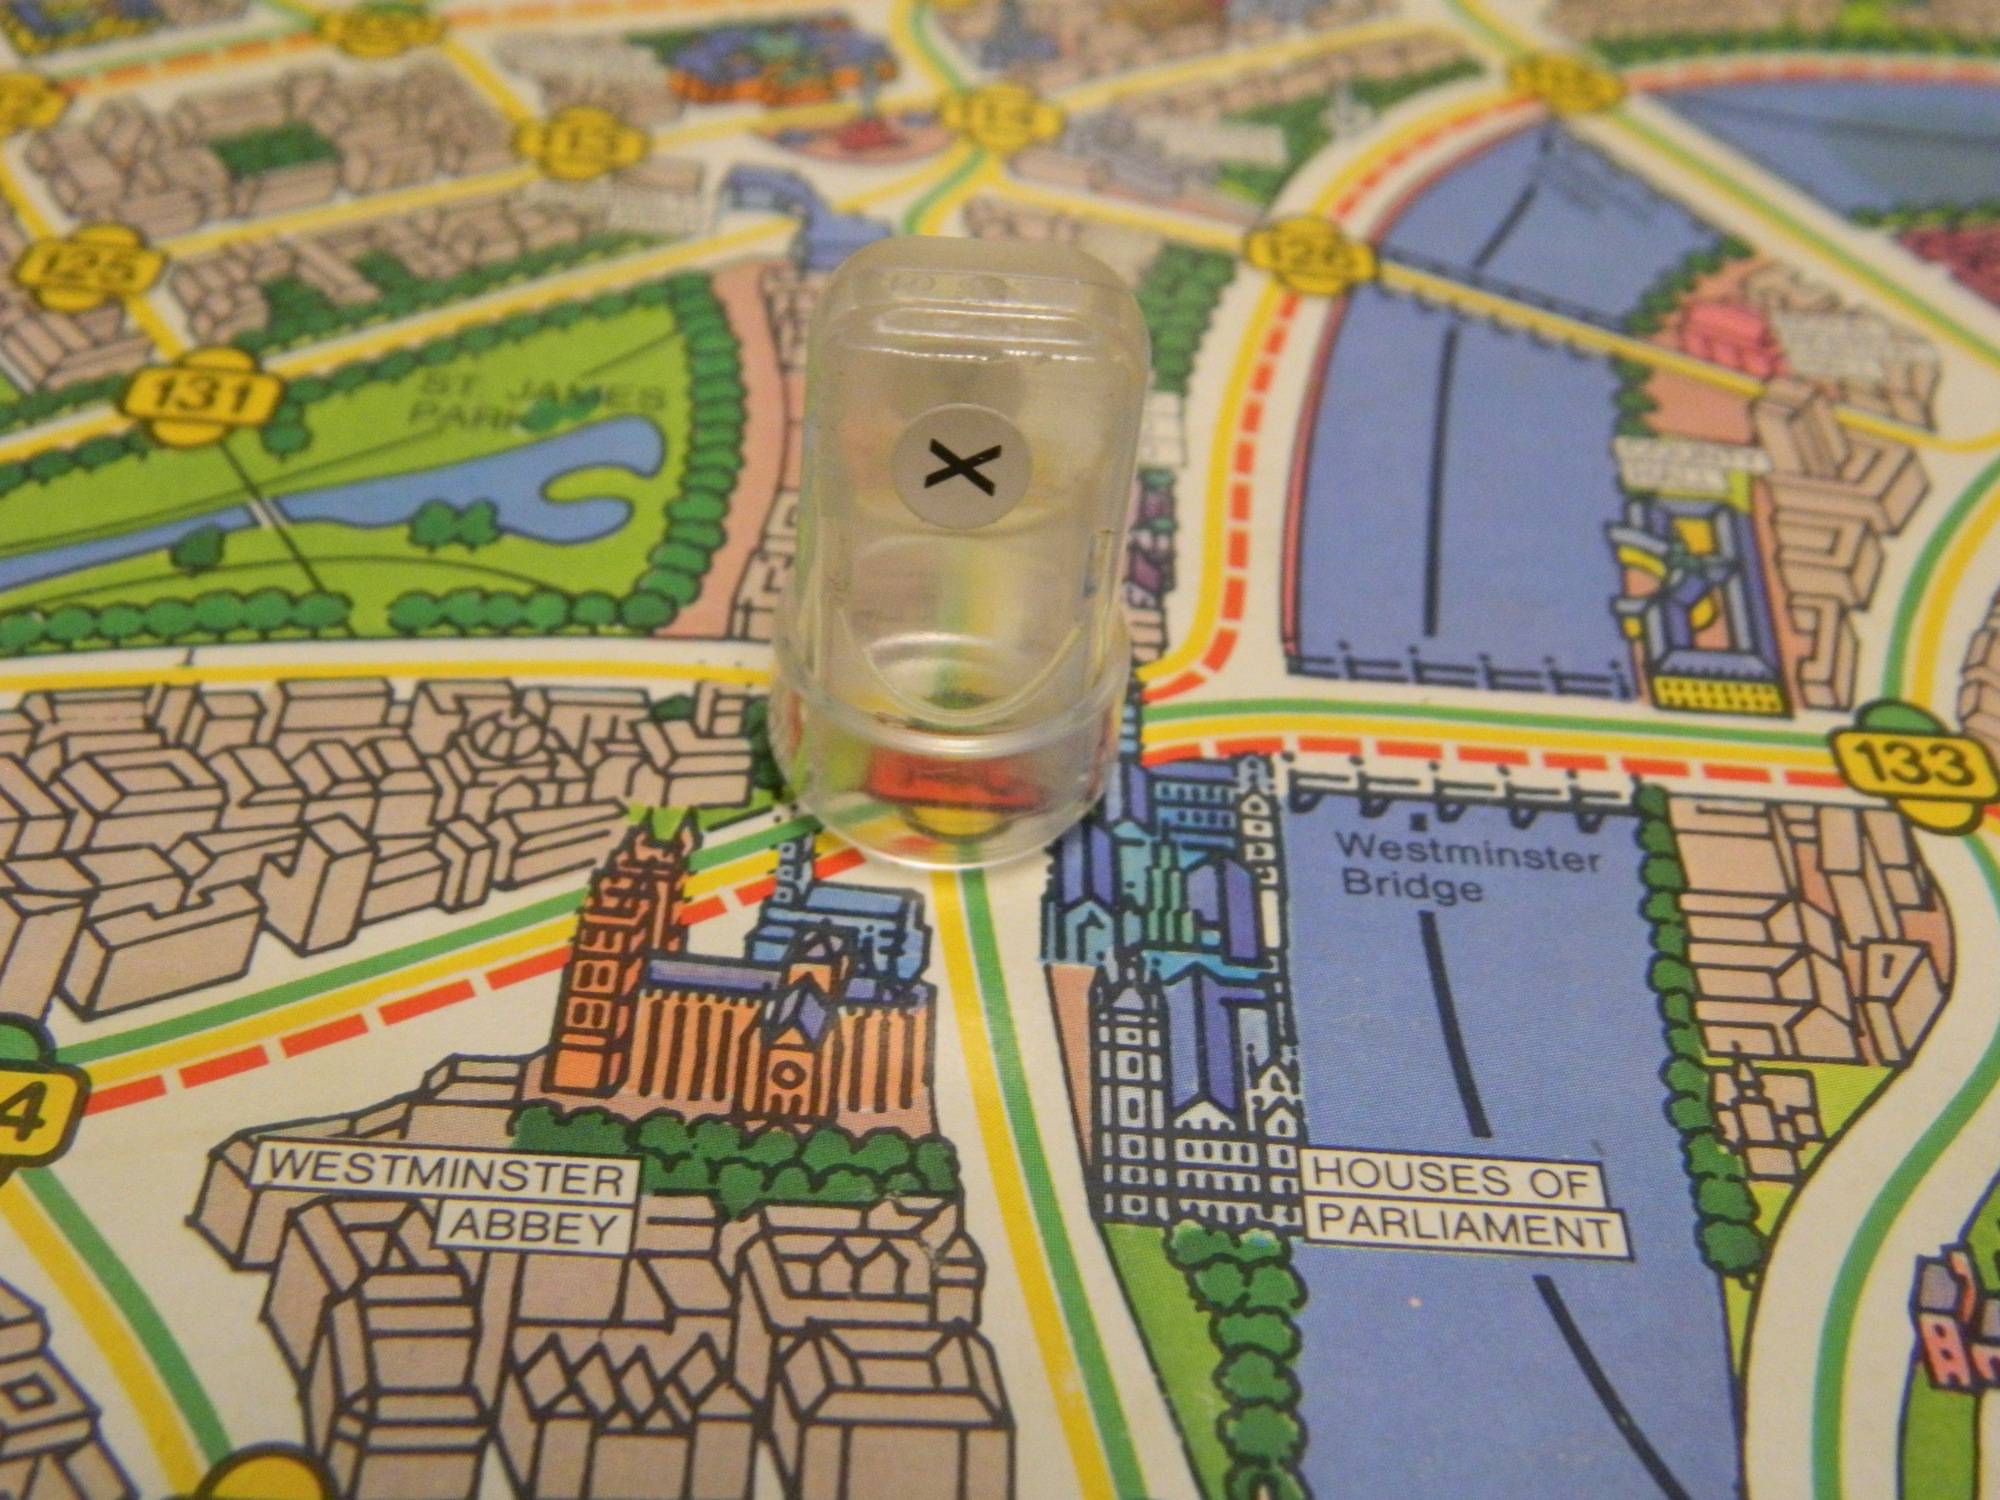 Learn to Play Scotland Yard Board Game on Mobile [Android / iOS] 